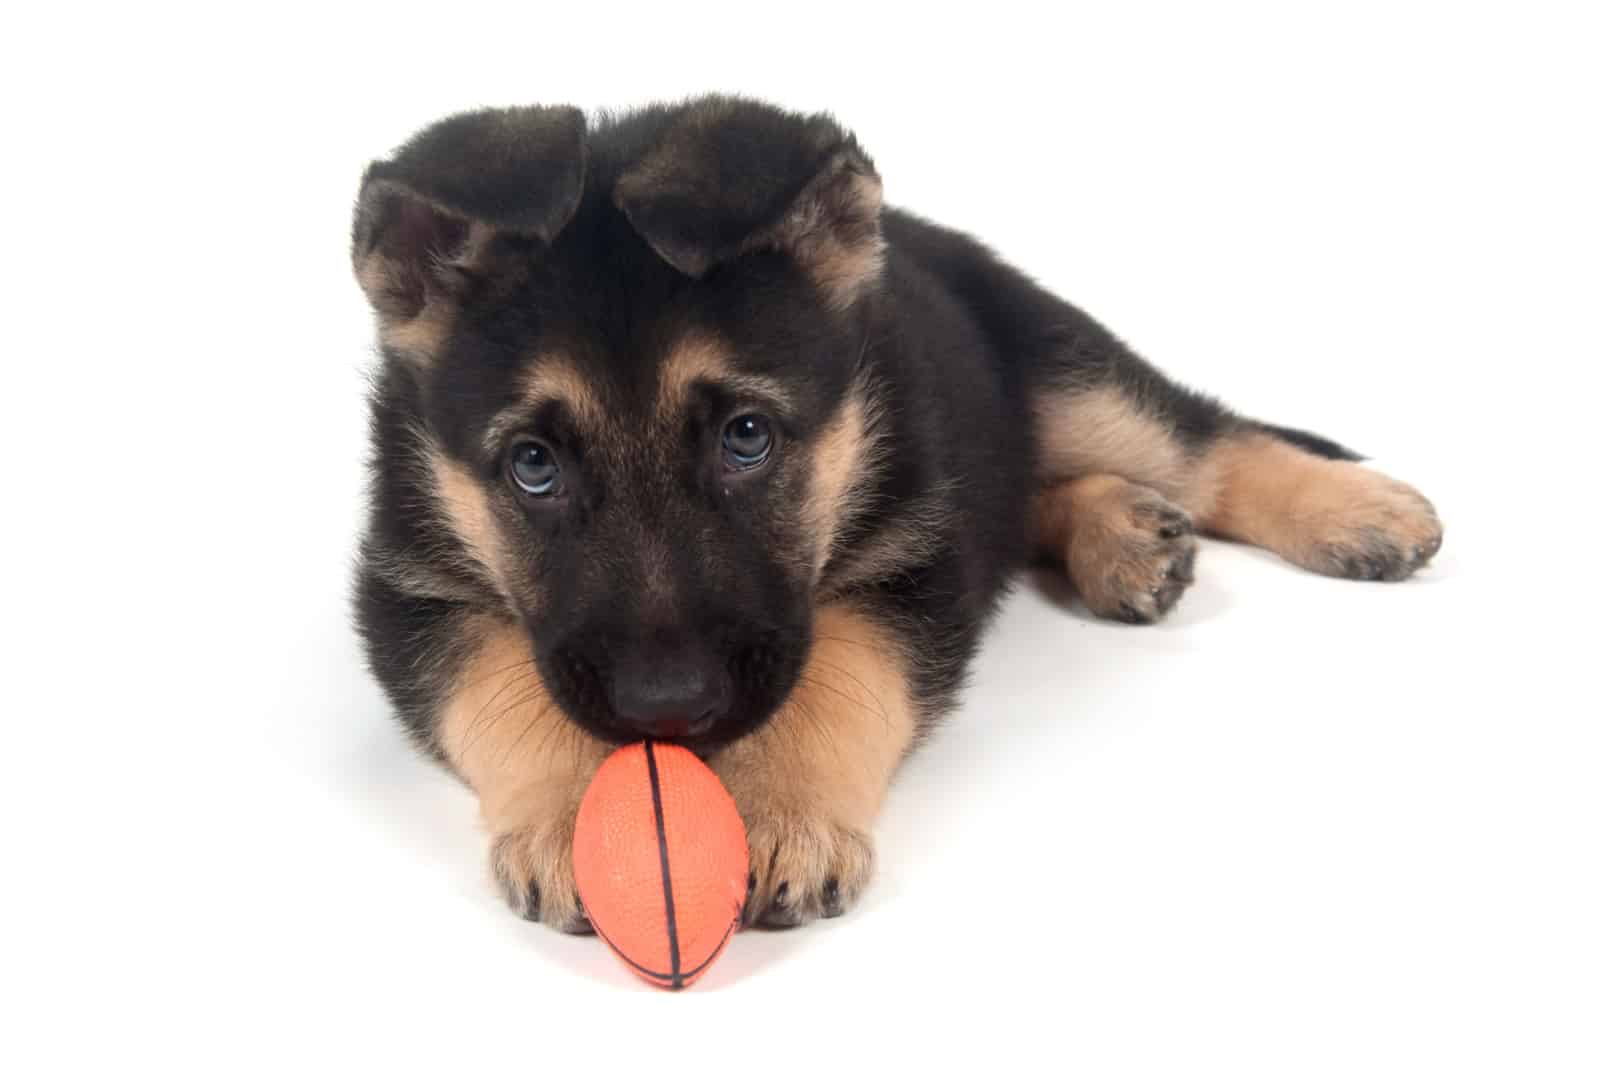 Male German Shepherd puppy chewing on toy while laying down